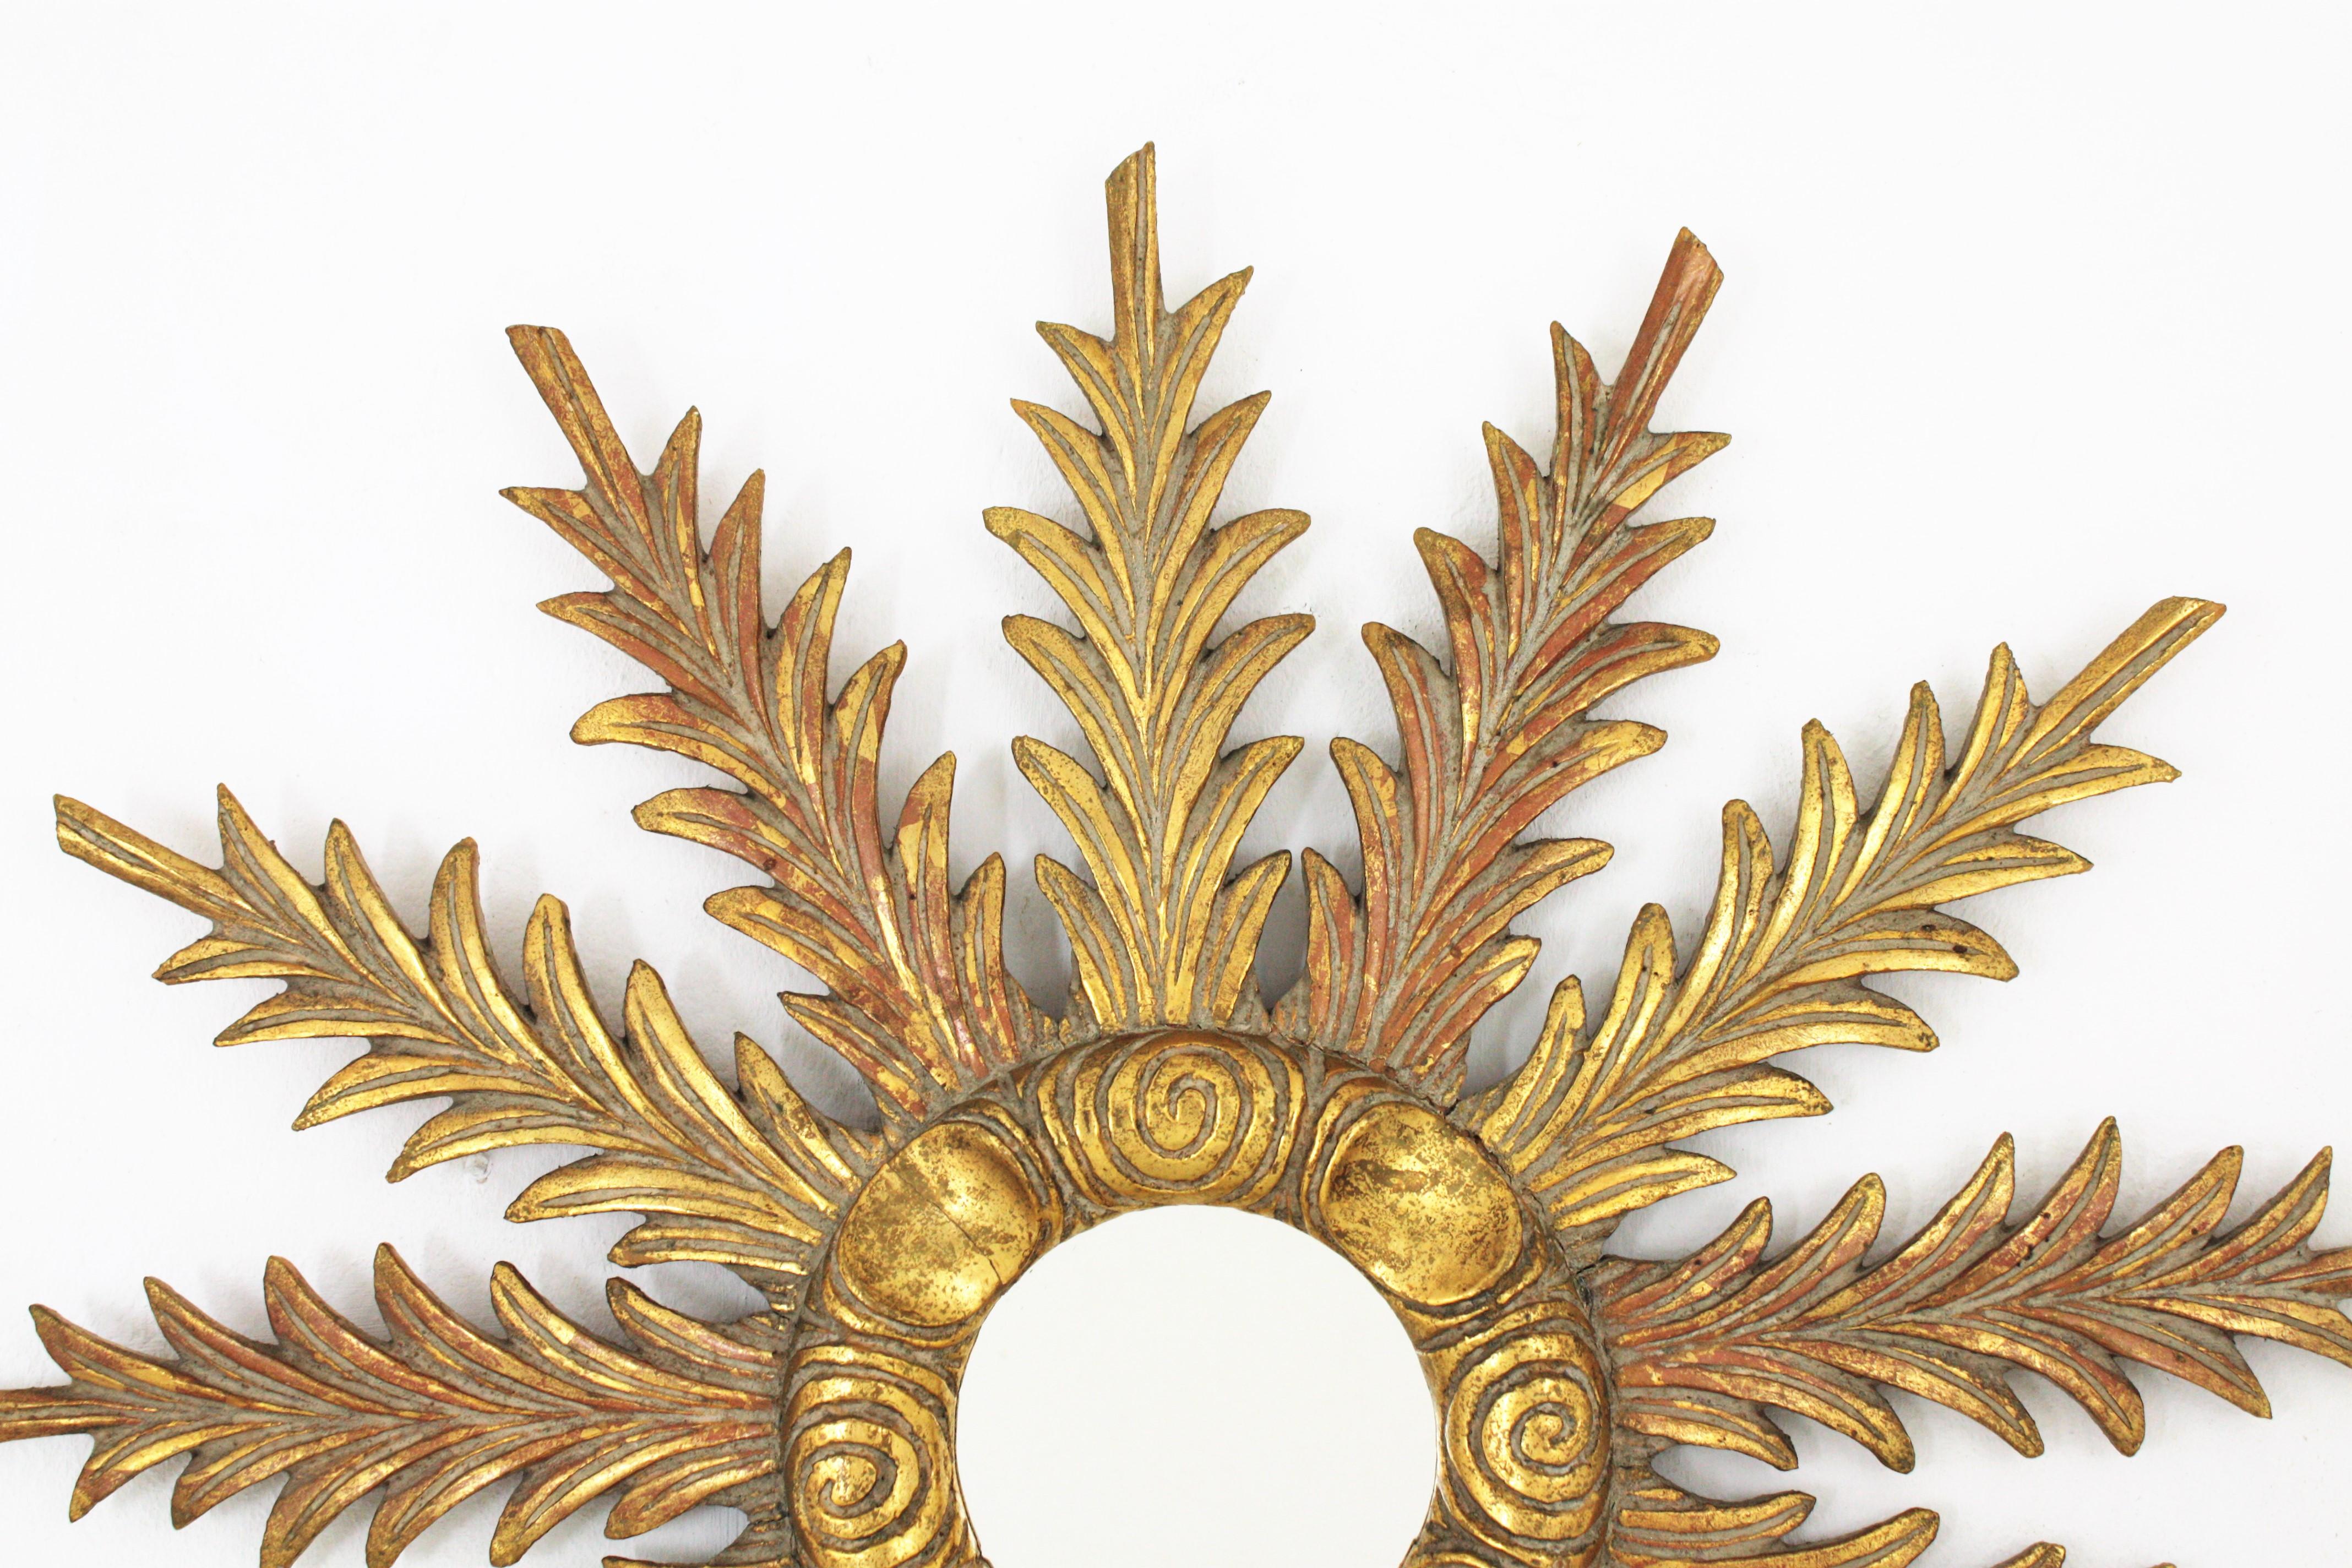 Sunburst Starburst Giltwood Mirror with Foliage Carvings, 1940s In Good Condition For Sale In Barcelona, ES